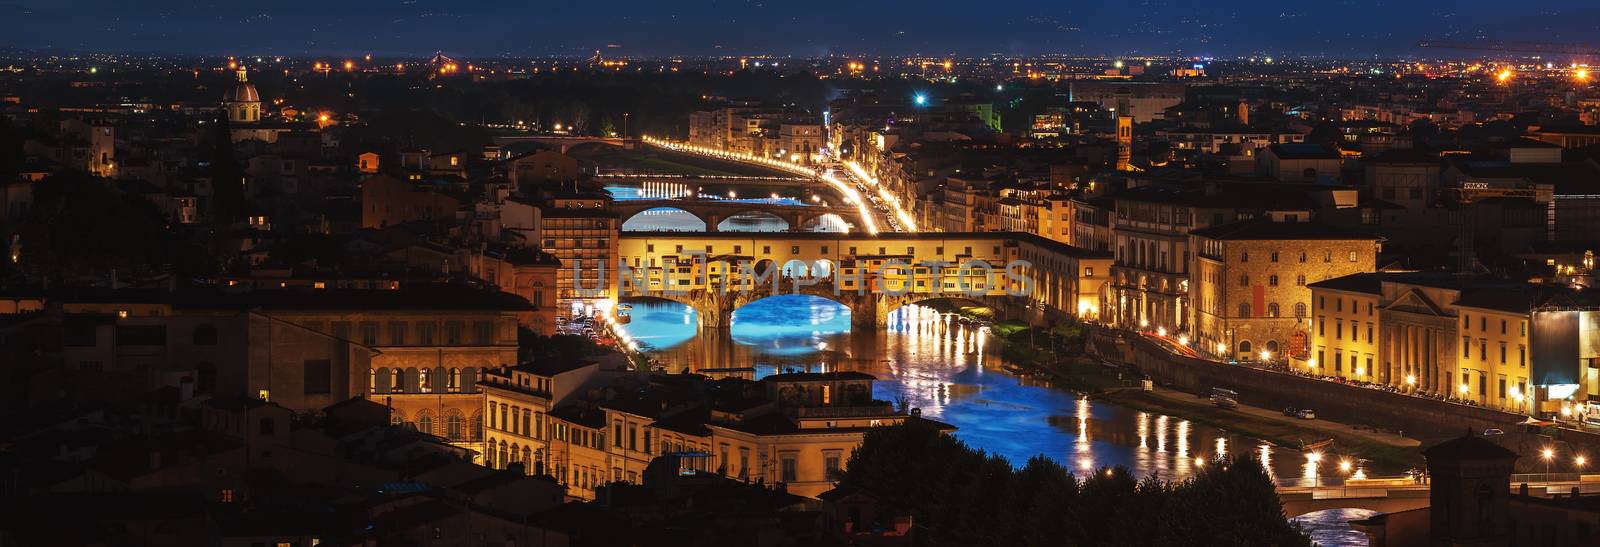 Night over Ponte Vecchio on river Arno in Florence, Italy